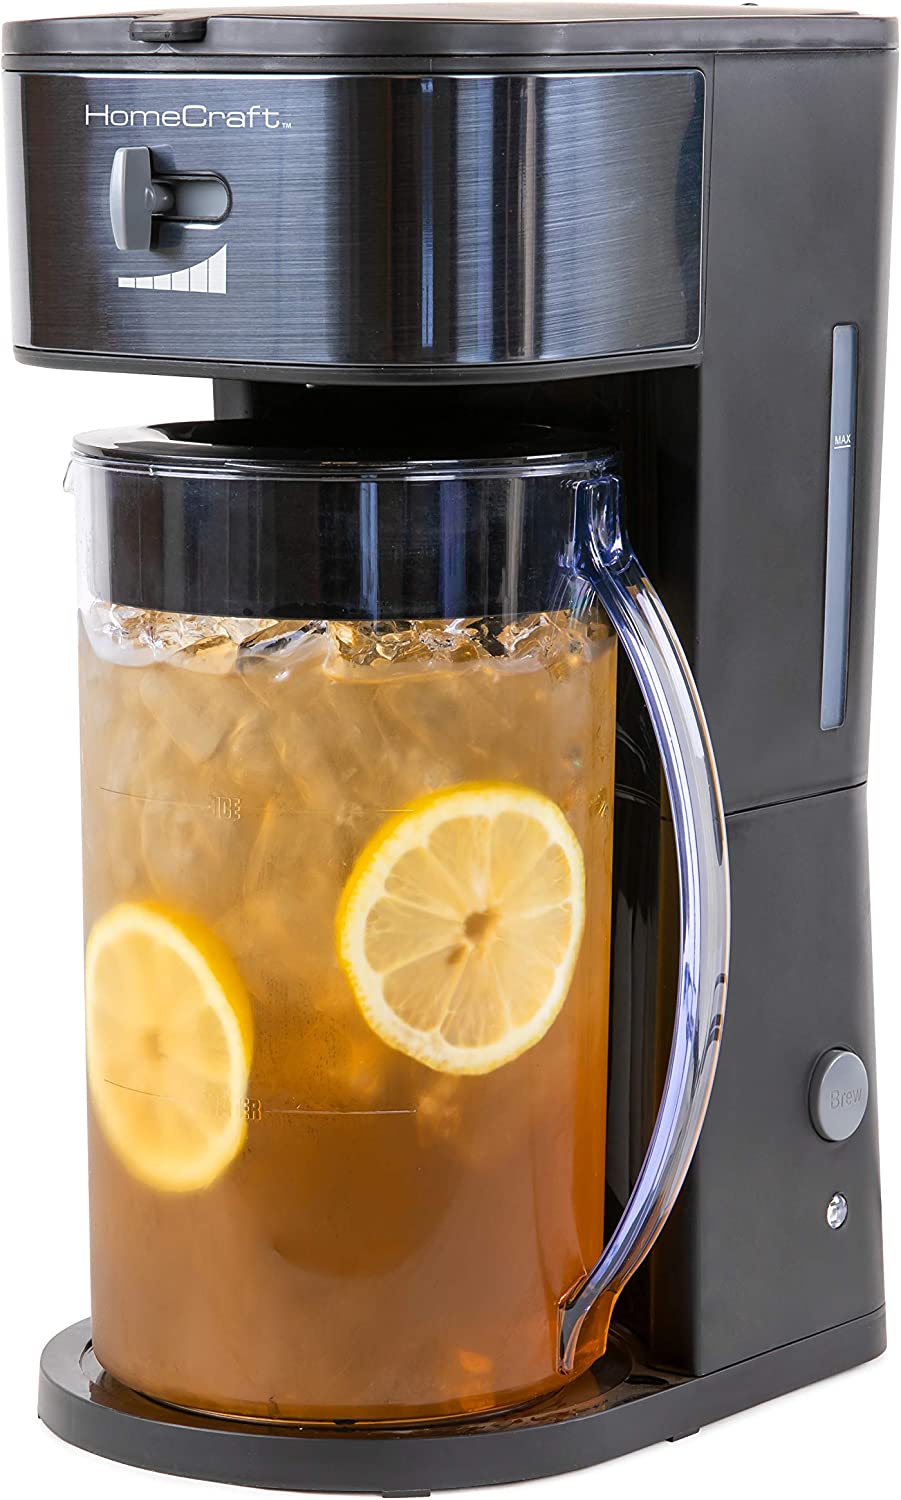  VETTA 2.5 Qt. Iced Tea Maker with Adjustable Strength Selector  for Tea and Iced Coffee Brewing, Works with Loose Leaf, Bagged Tea or  Coffee Grounds, Removeable Brew Basket, Reusable Filter, Black (